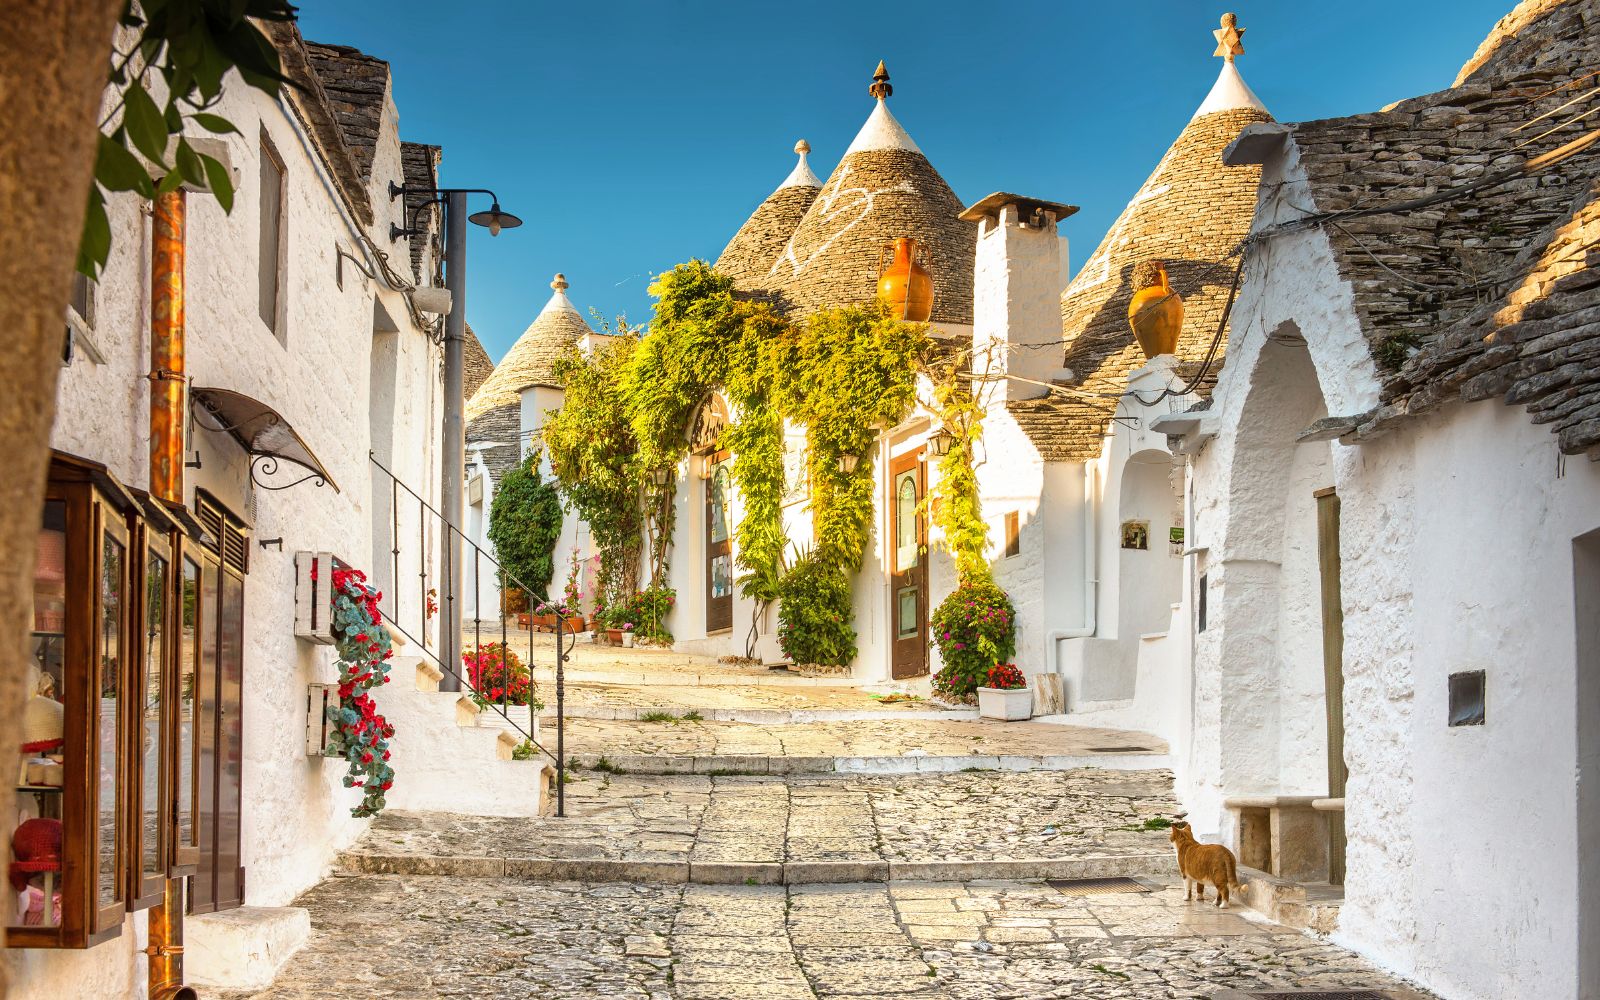 15 Best Things To Do in Alberobello, Italy